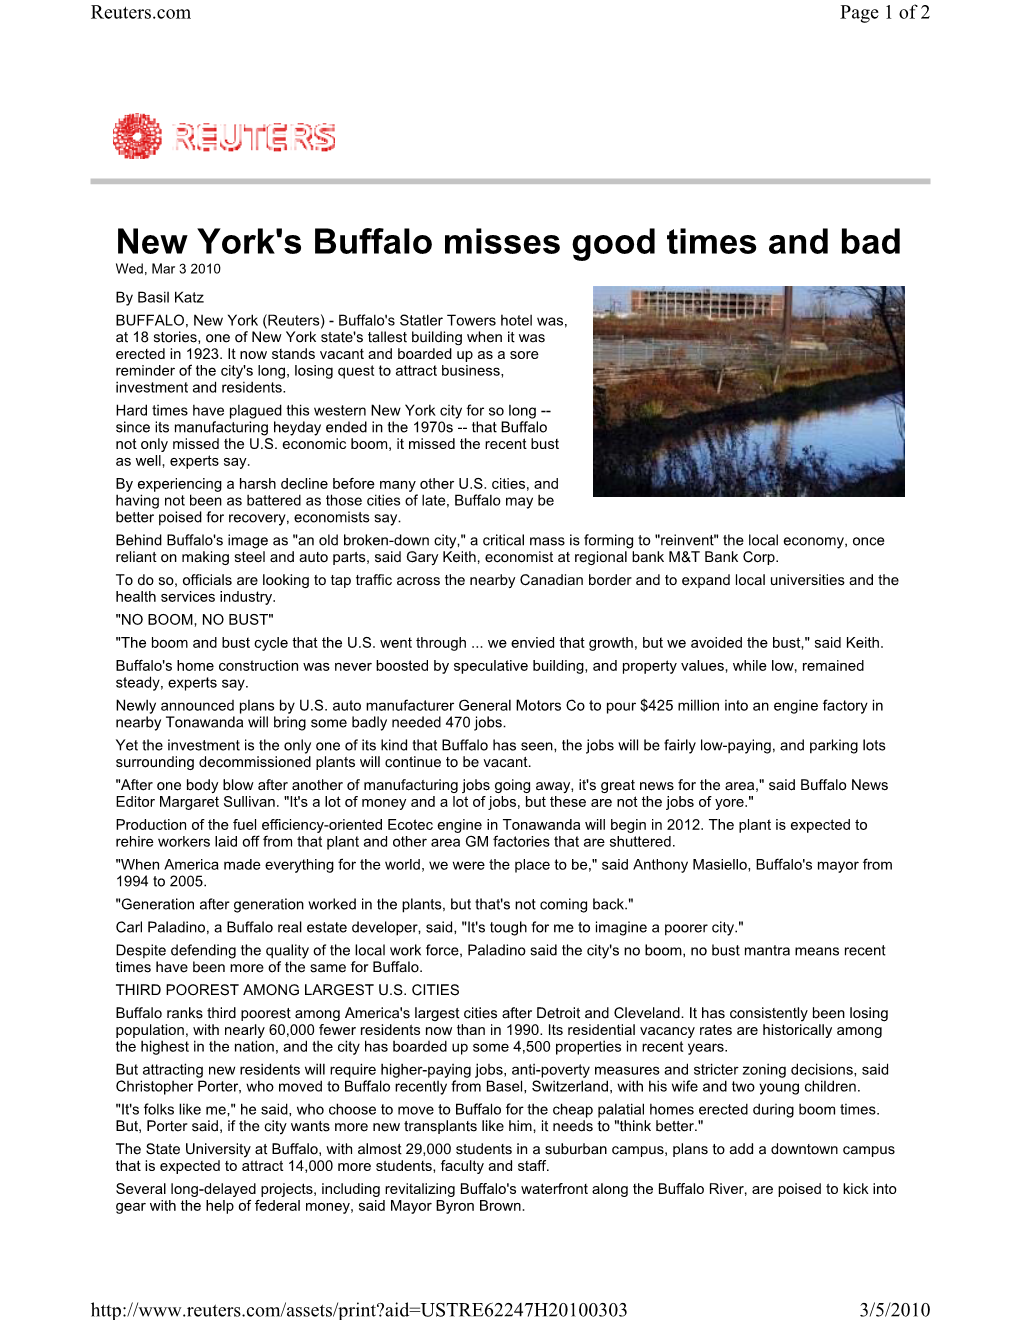 New York's Buffalo Misses Good Times And